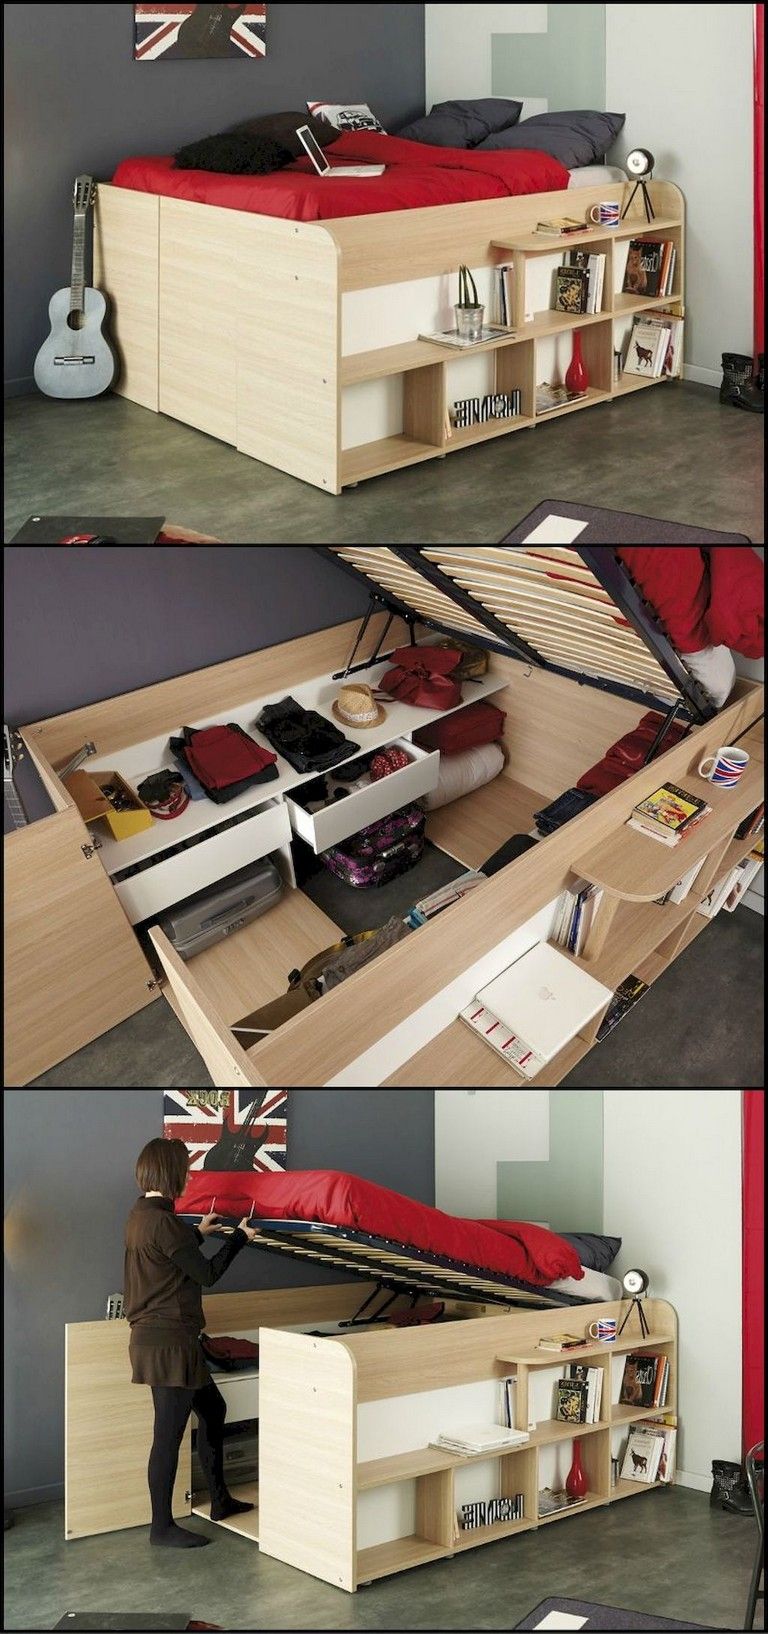 69+ Creative Under Bed Storage Ideas For Bedrooms